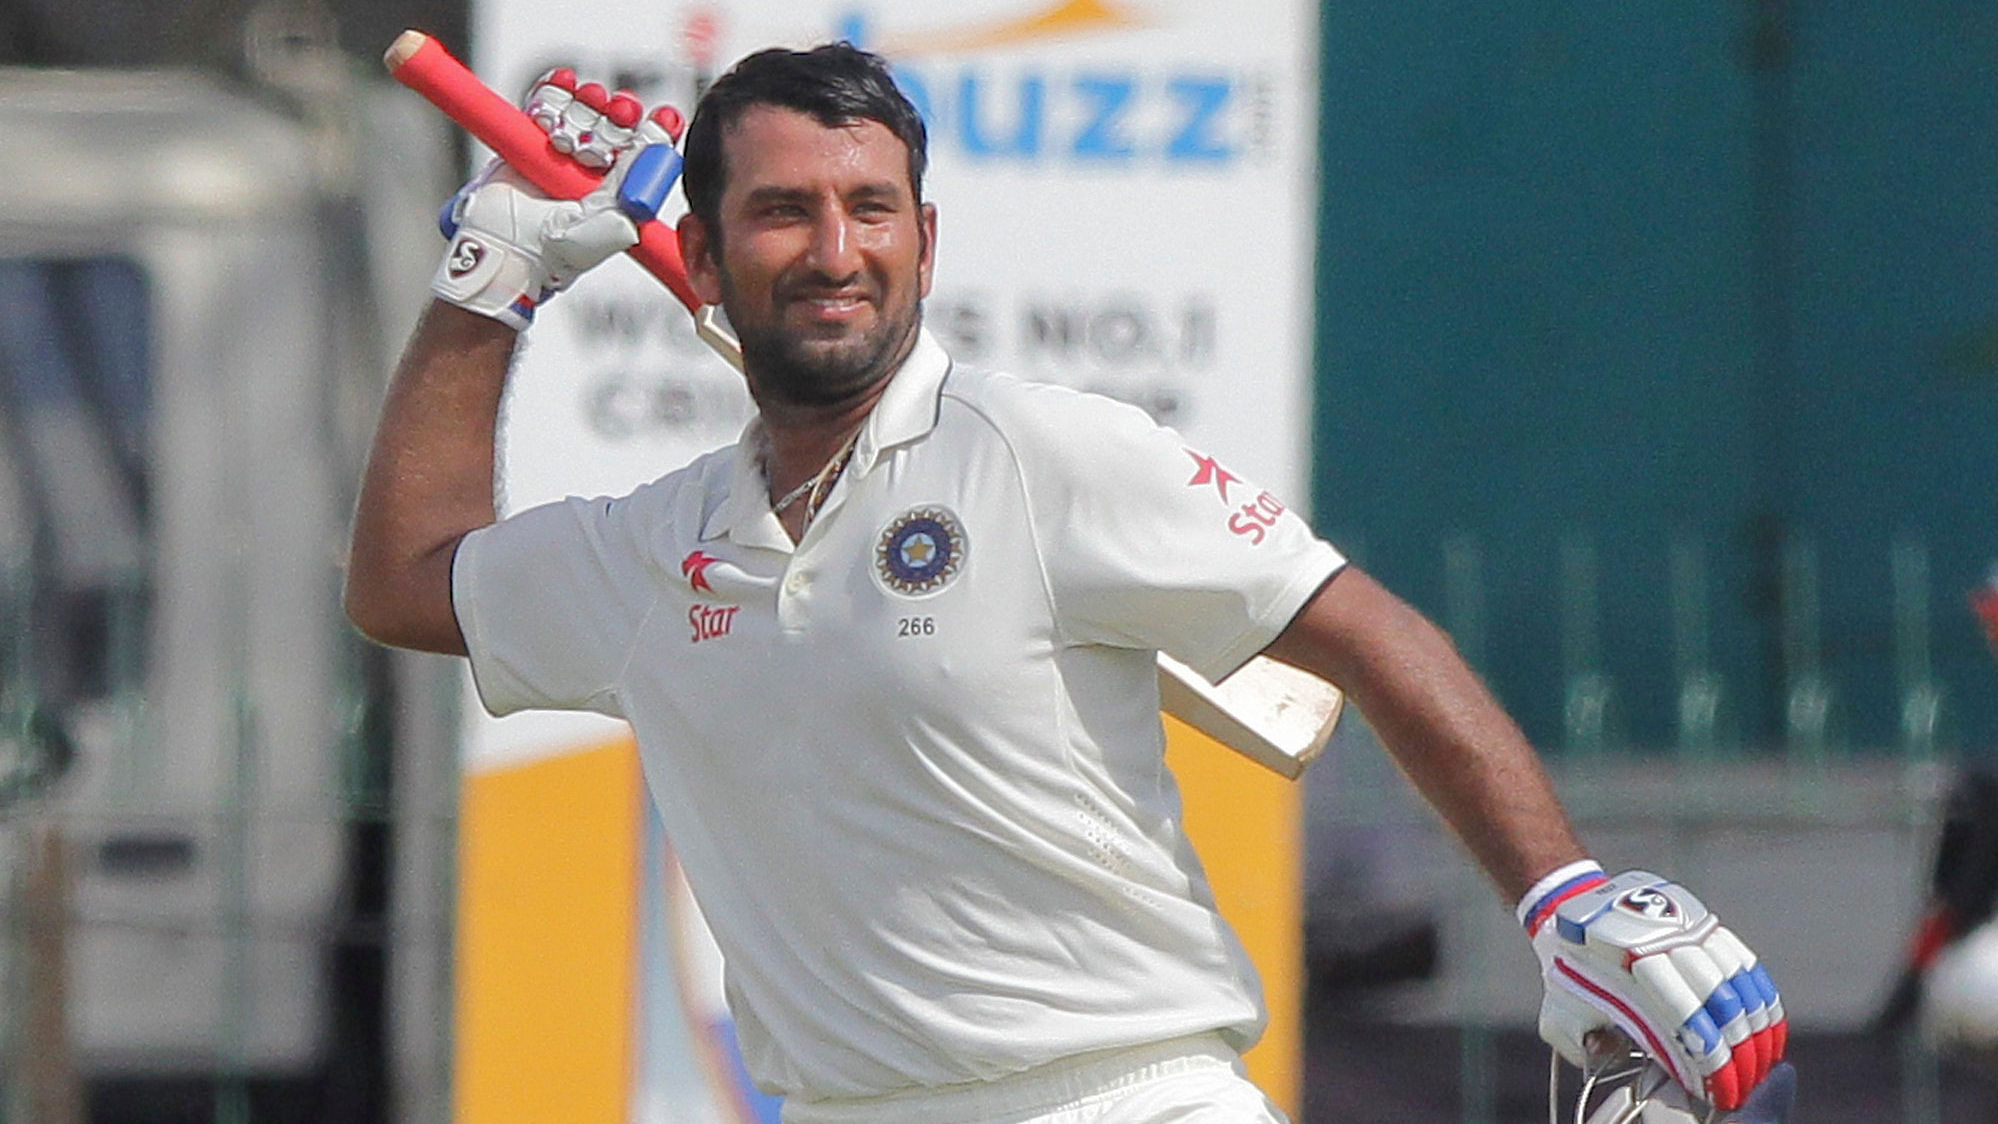 Cheteshwar Pujara celebrates after scoring a hundred against Sri Lanka in the third Test match at Colombo. (Photo: AP)